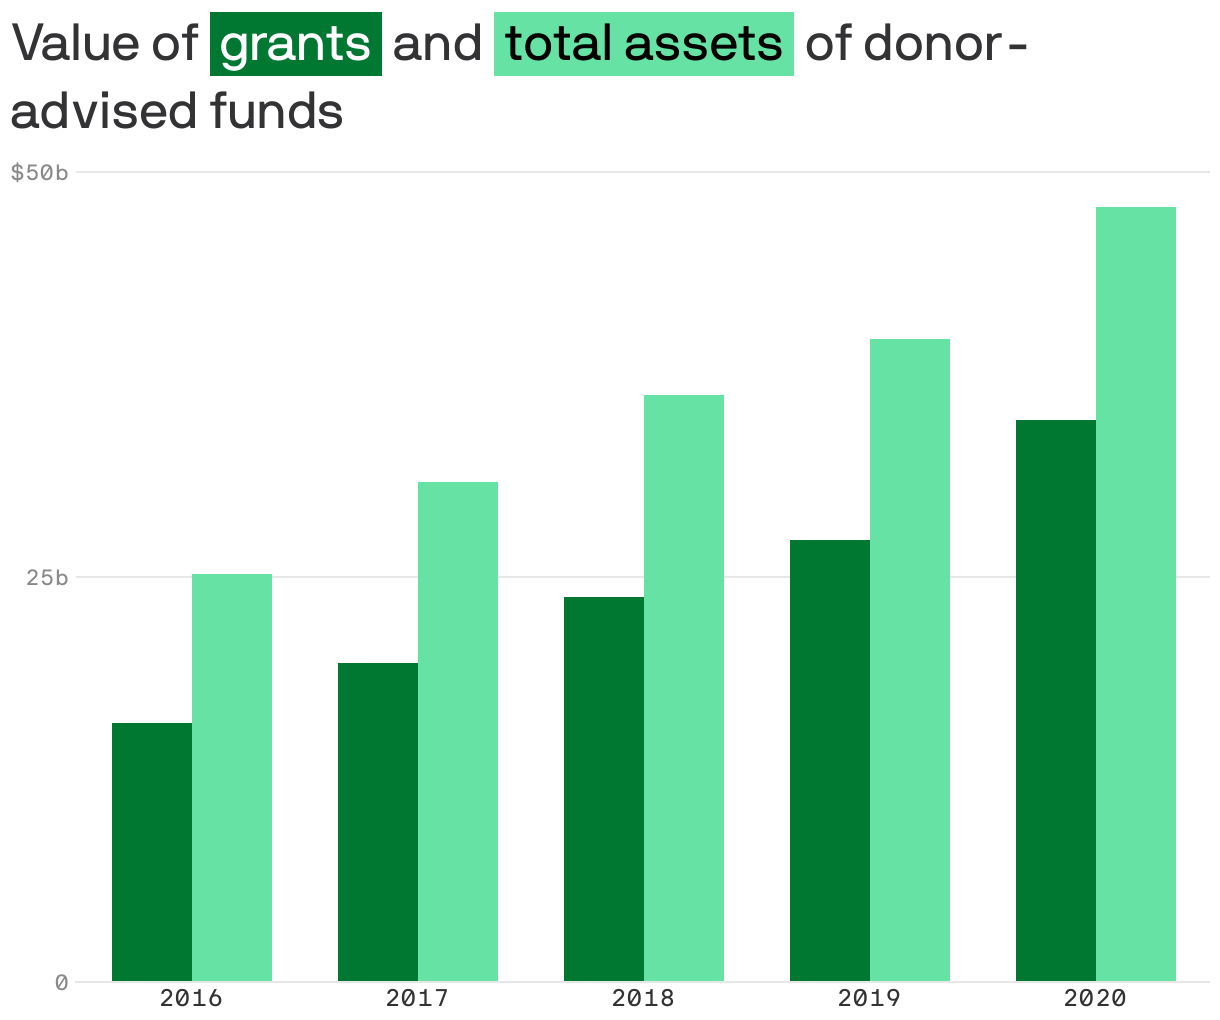 Value of <span style="background:#007831; padding:3px 5px;color:white;">  grants</span> and <span style="background:#65e2a4; padding:3px 5px;color:black">total assets</span> of donor-advised funds